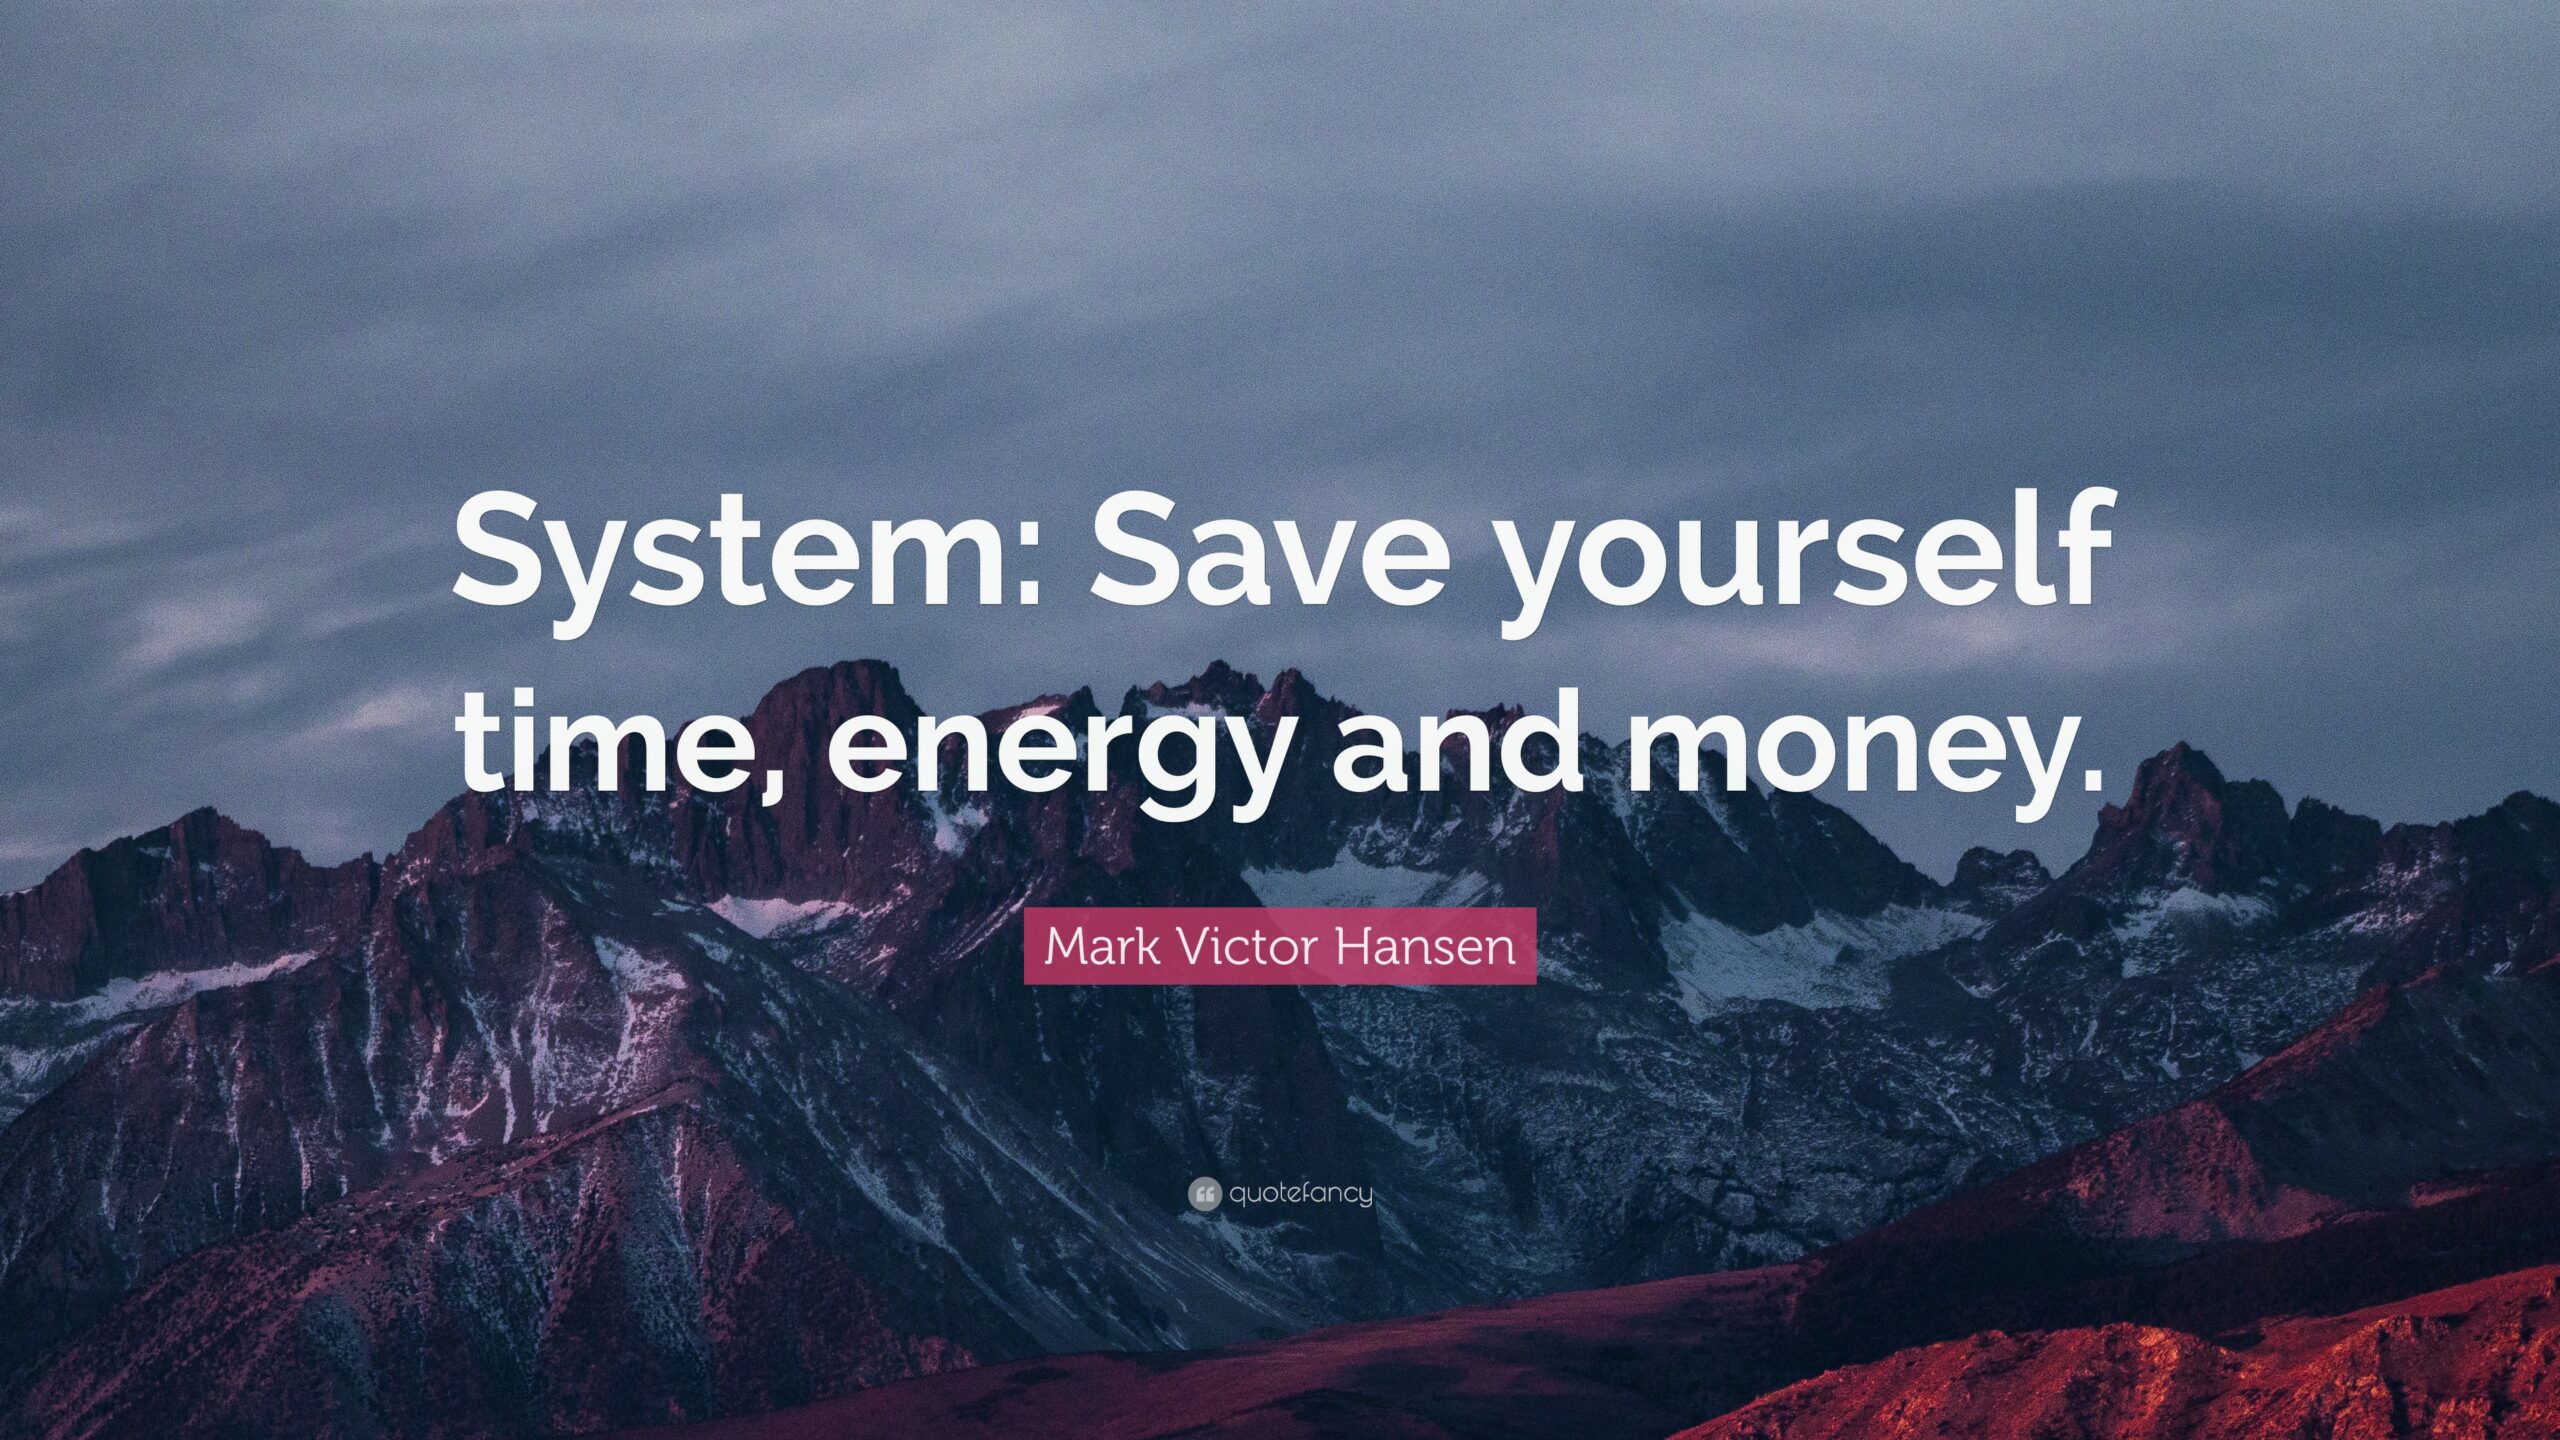 How SYSTEM can help you regain time, energy and money